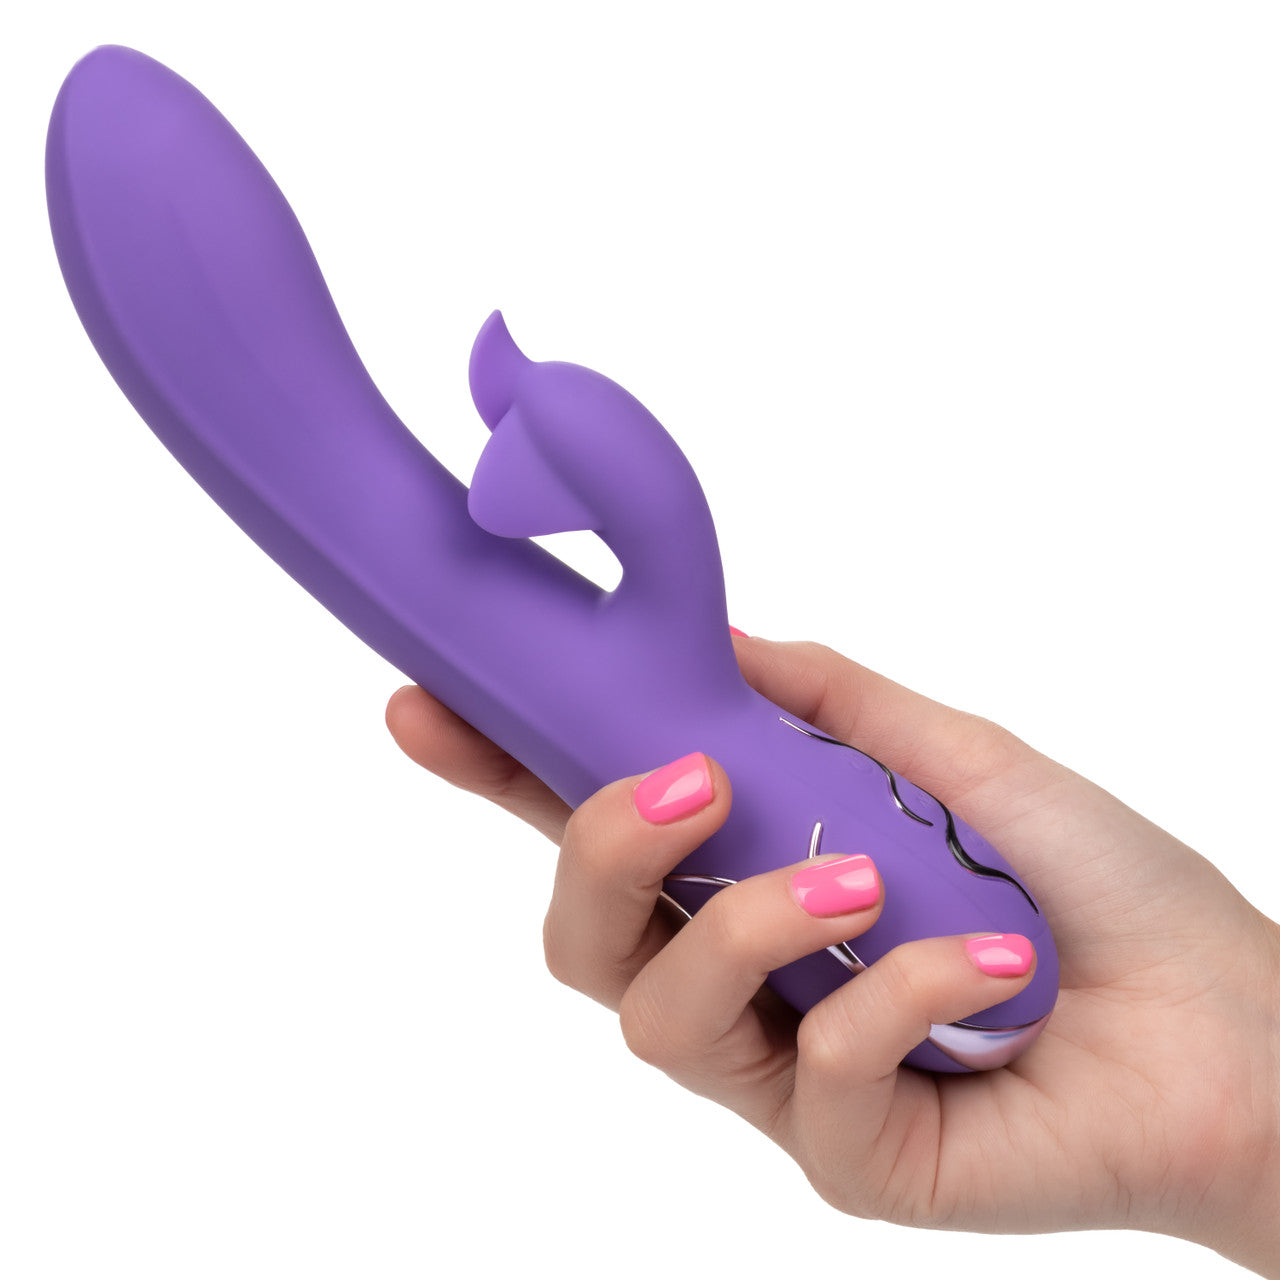 Insatiable G Inflatable G-Flutter Vibrator - Thorn & Feather